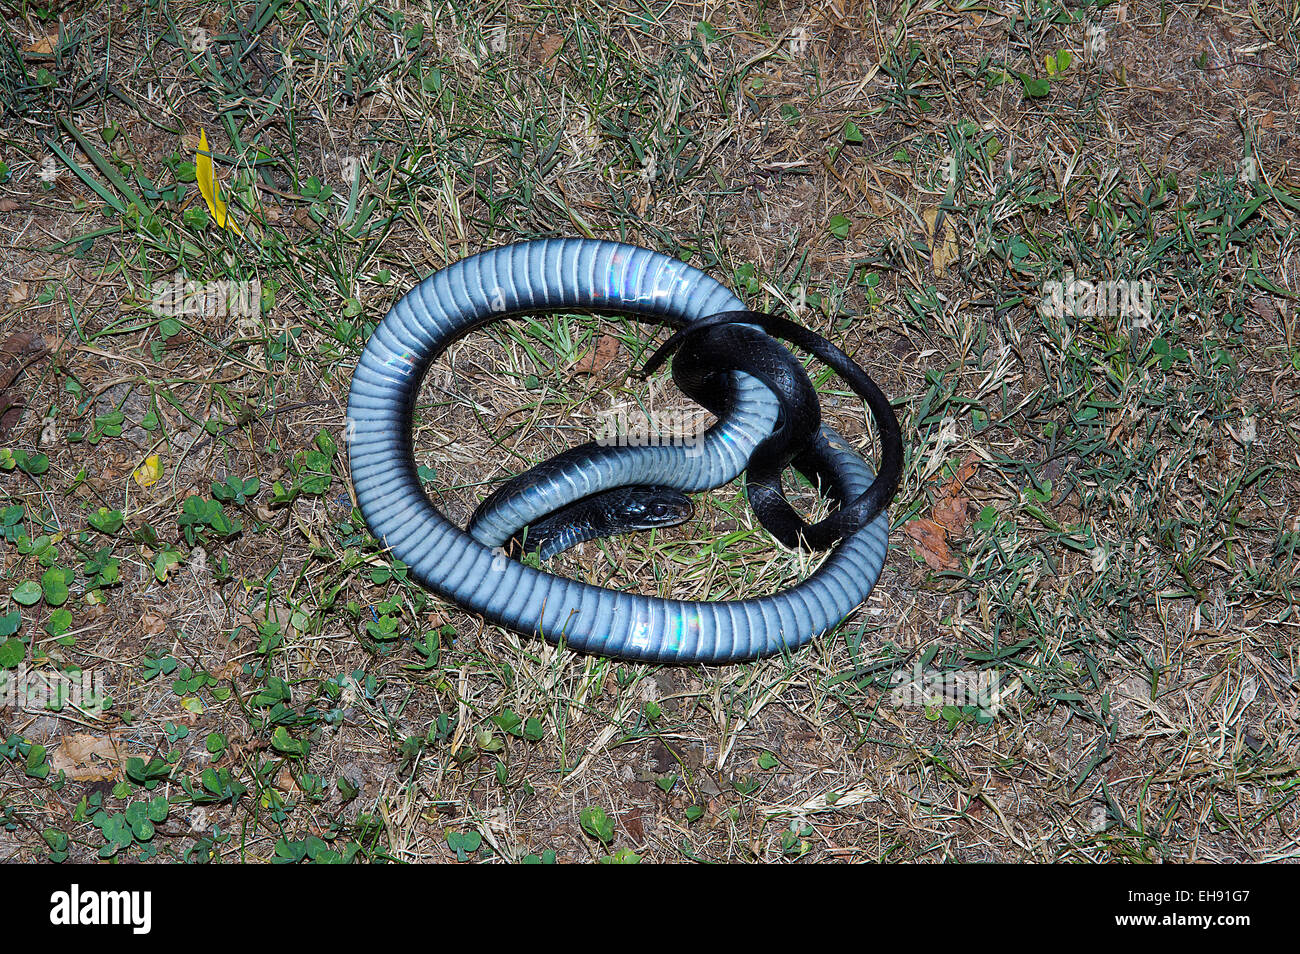 Northern Black Racer, Coluber constrictor constrictor, snake, North American Snake, reptile,  colubrid Stock Photo